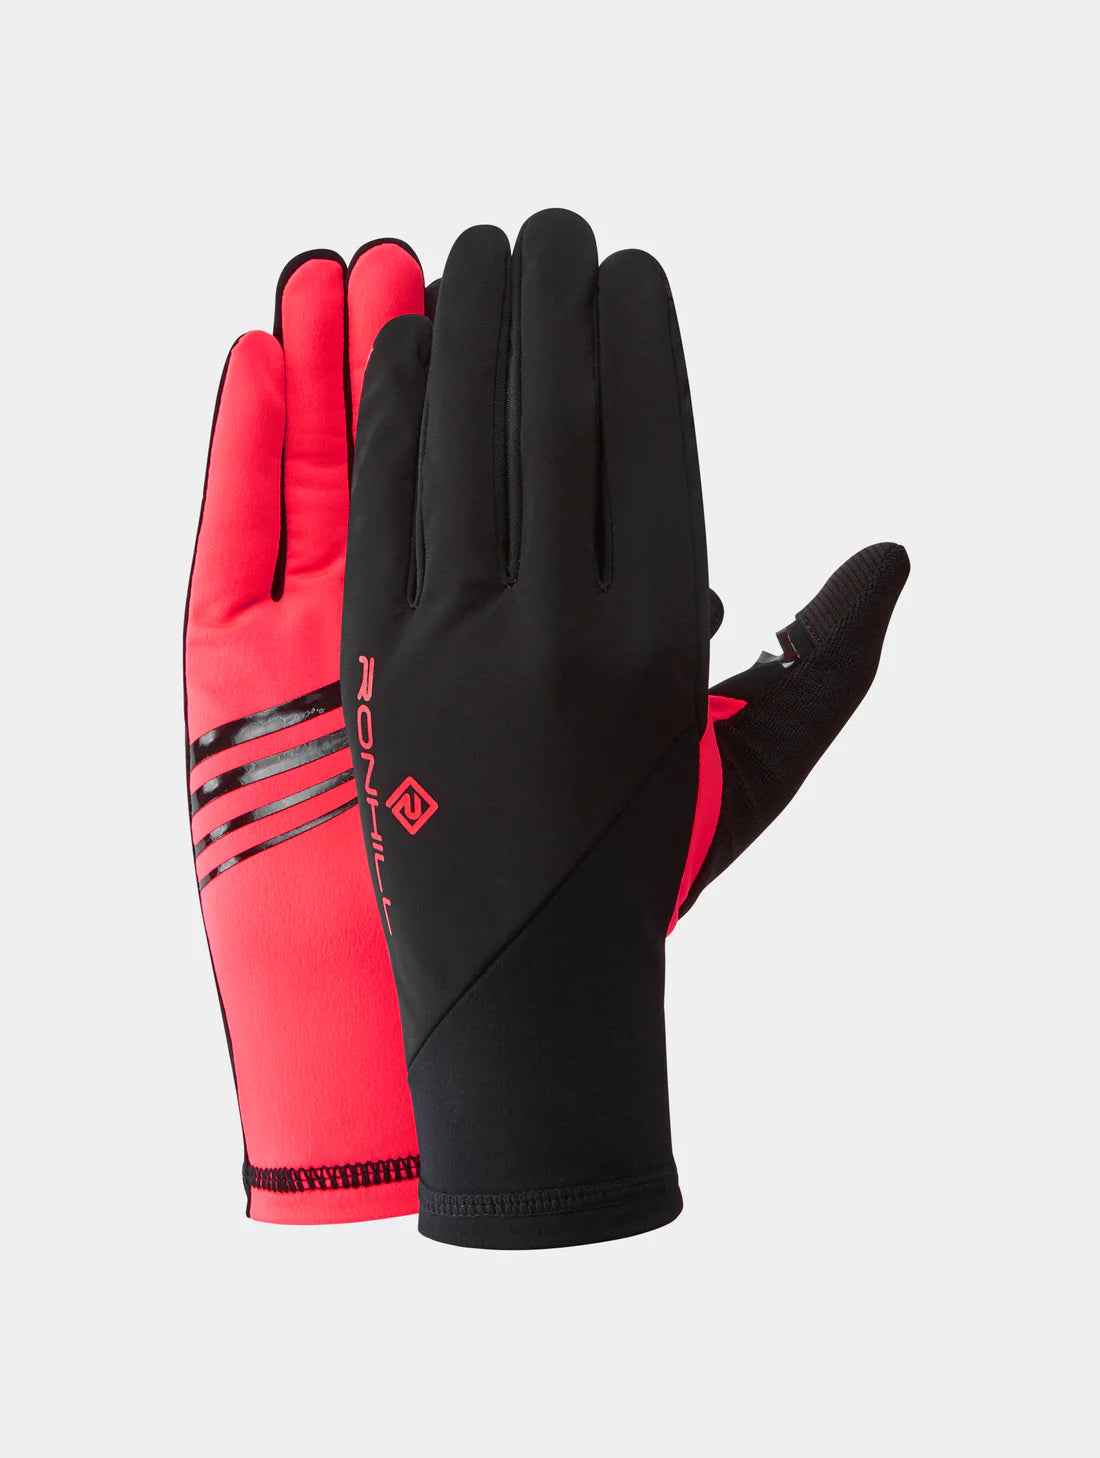 Ronhill Wind Block running glove pink and black